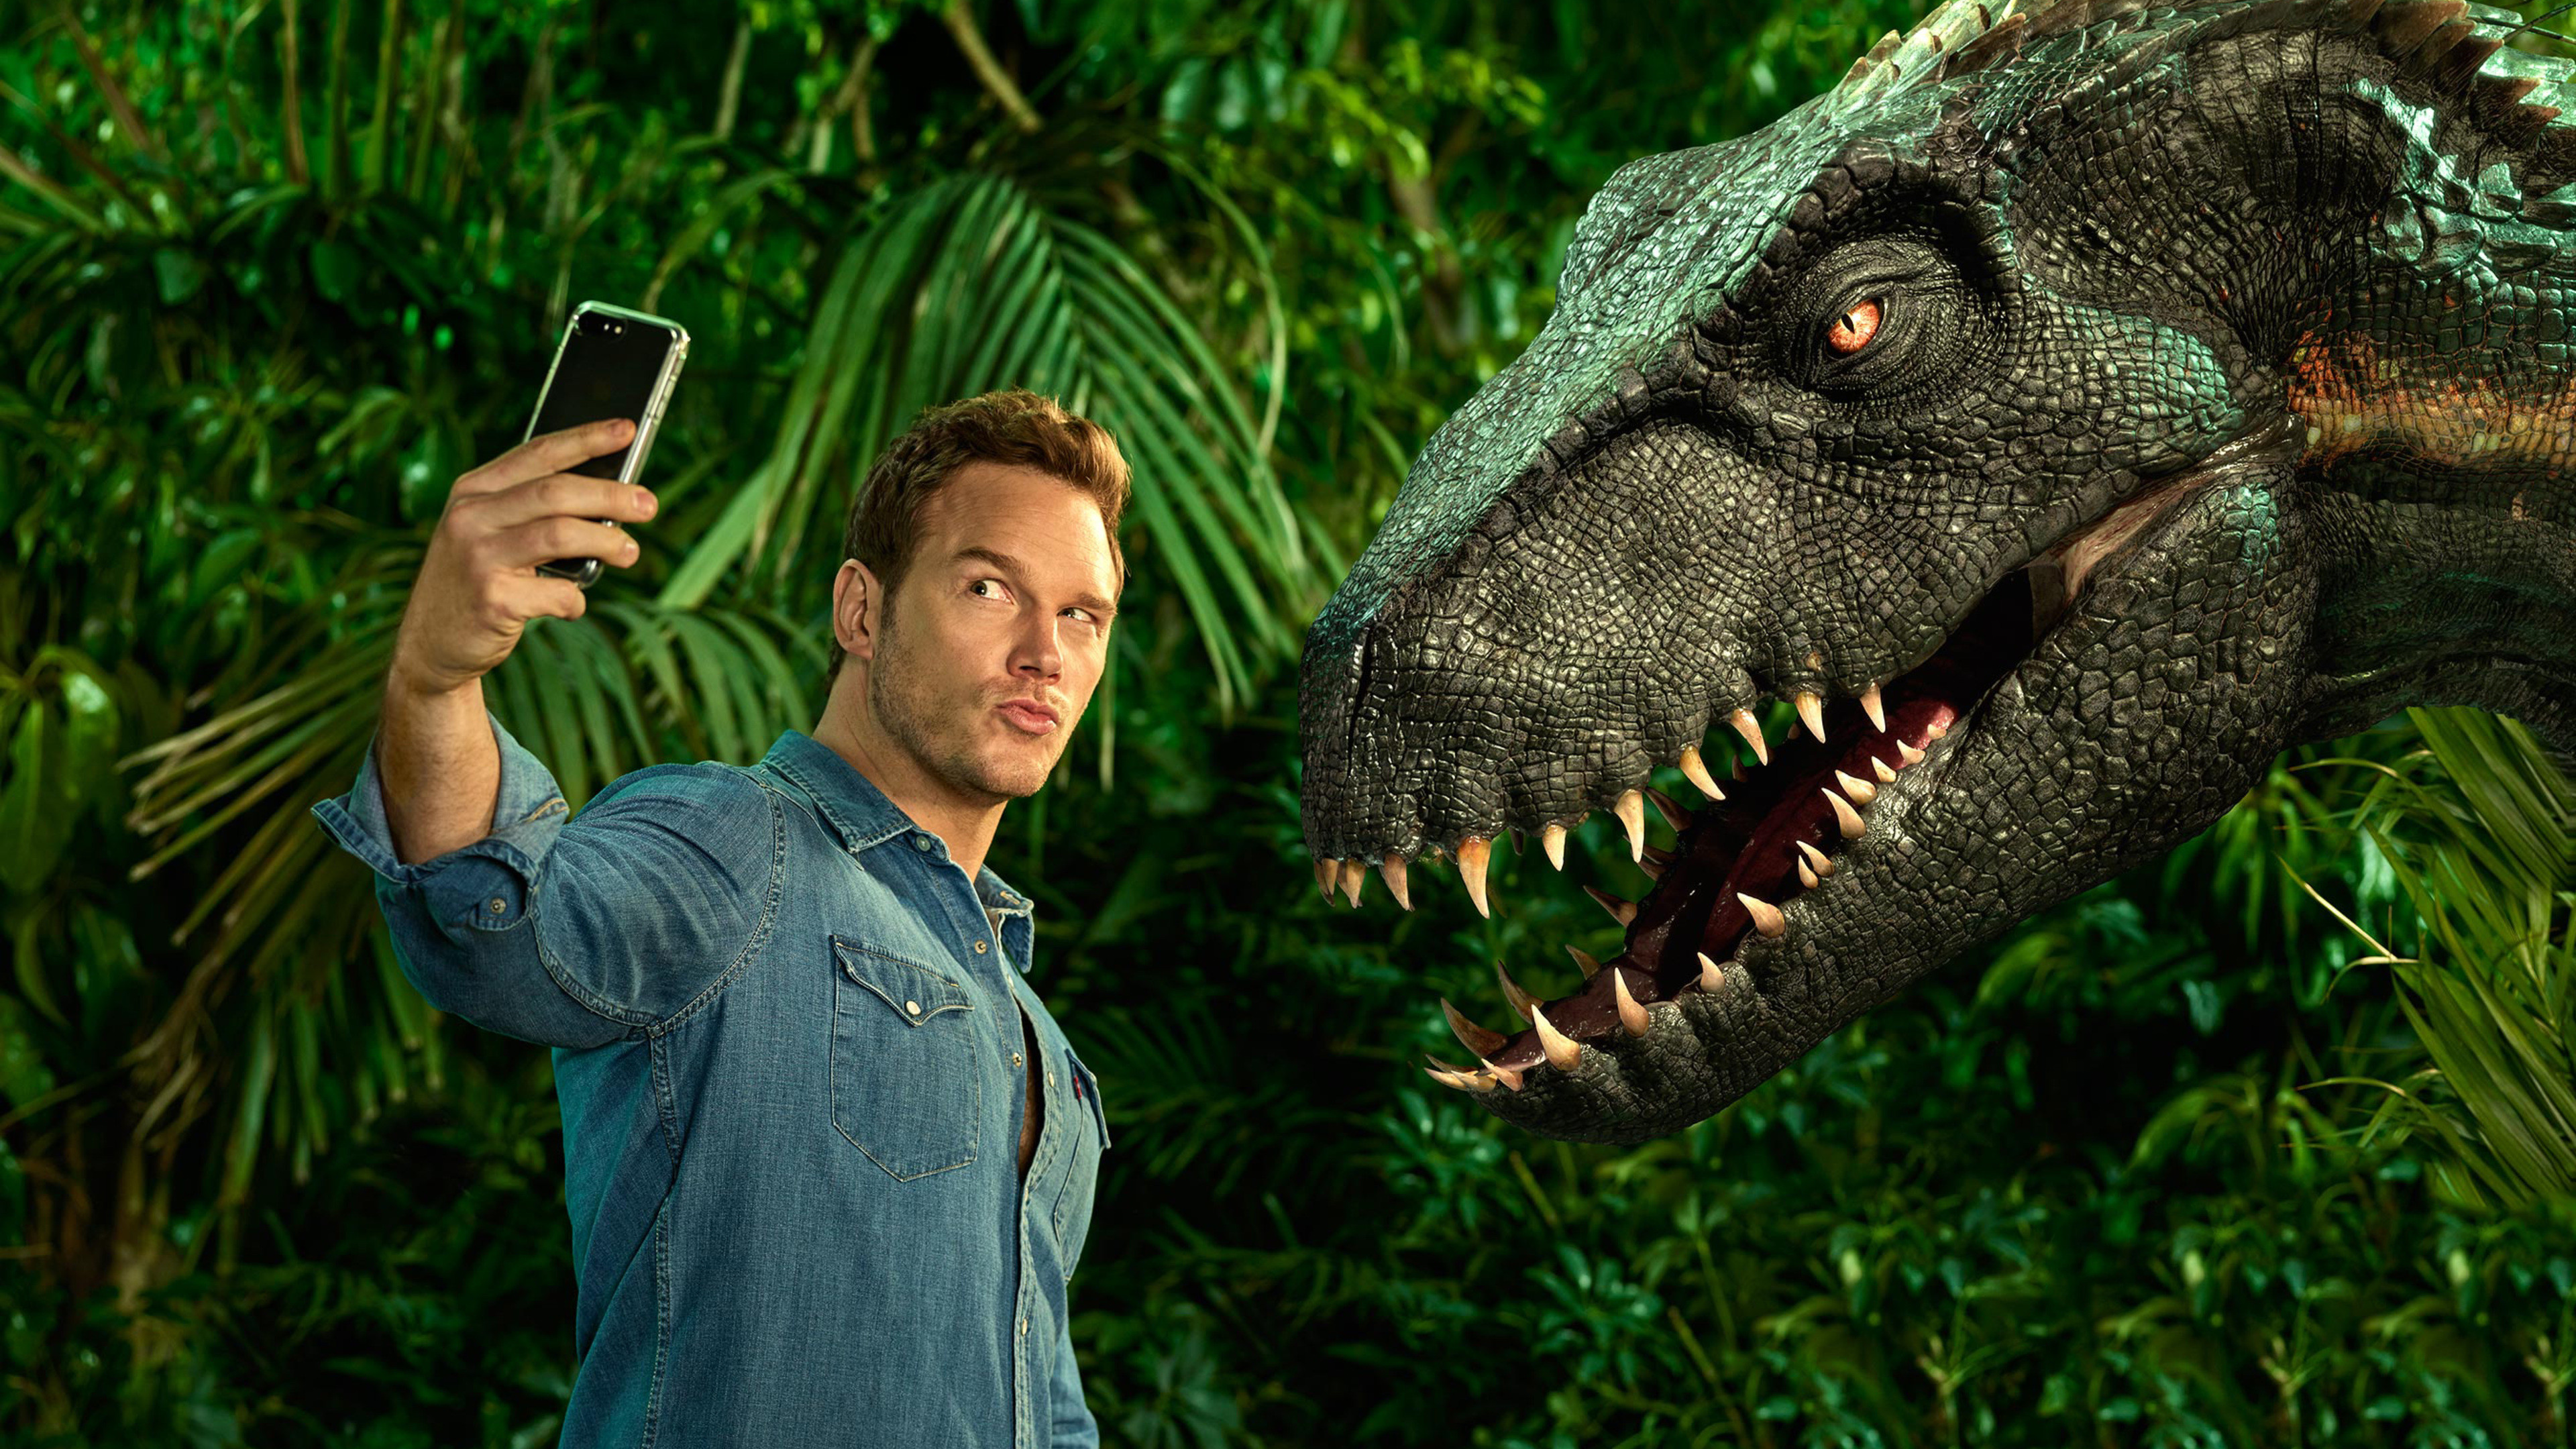 Jackpot City Casino Is Giving $1600 Free To Play Jurassic World